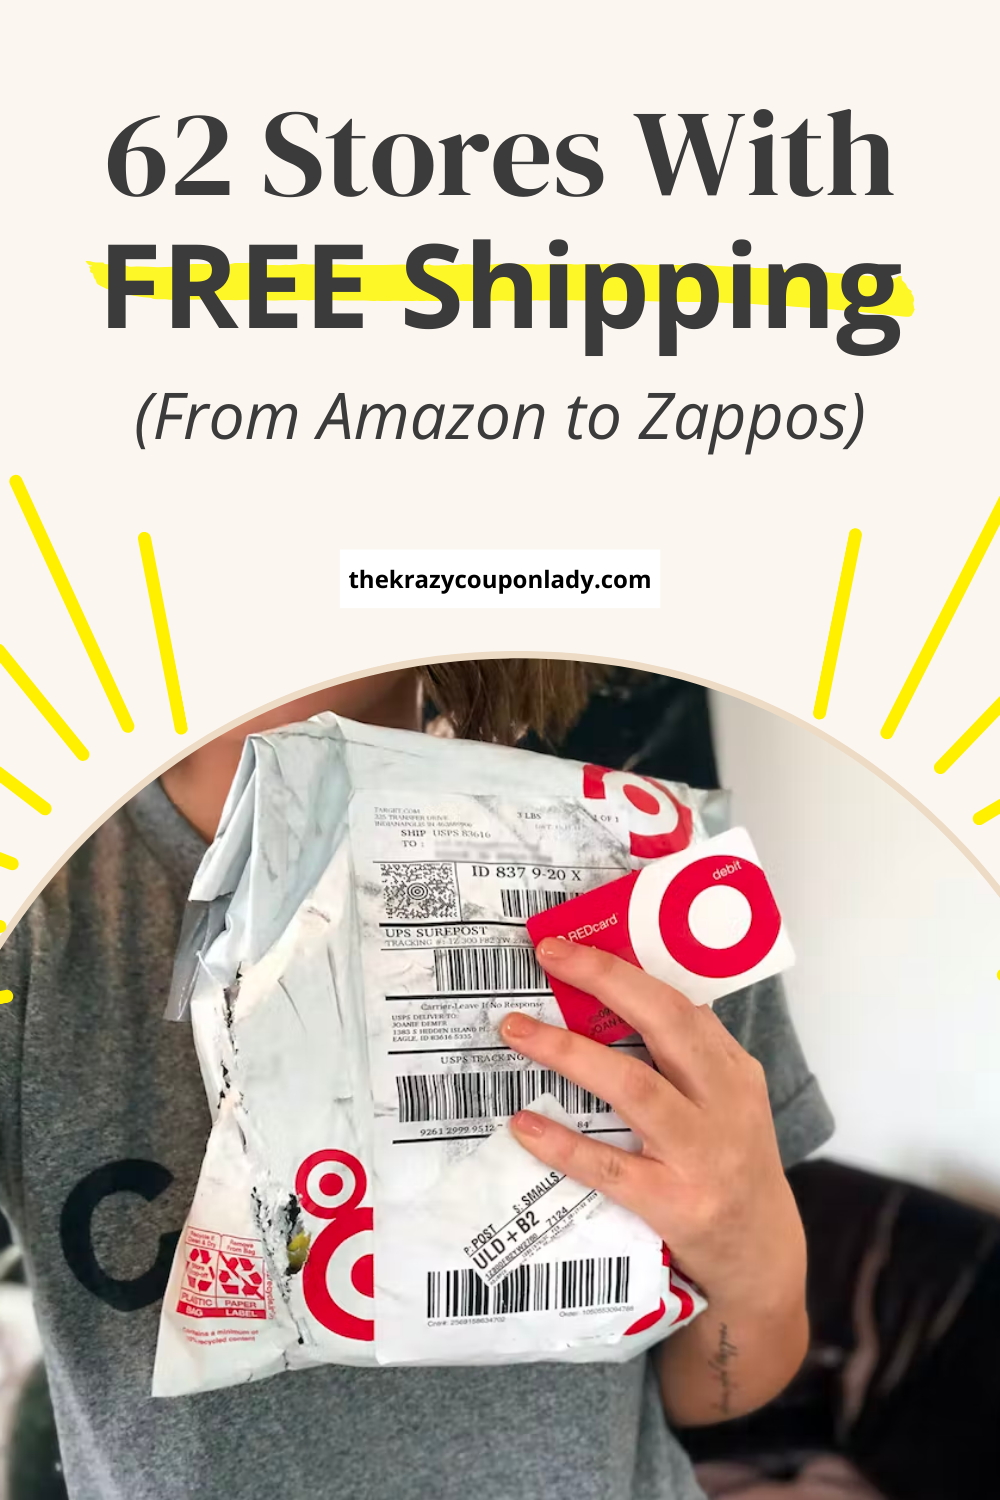 62 Stores With Free Shipping: Here's the List - The Krazy Coupon Lady